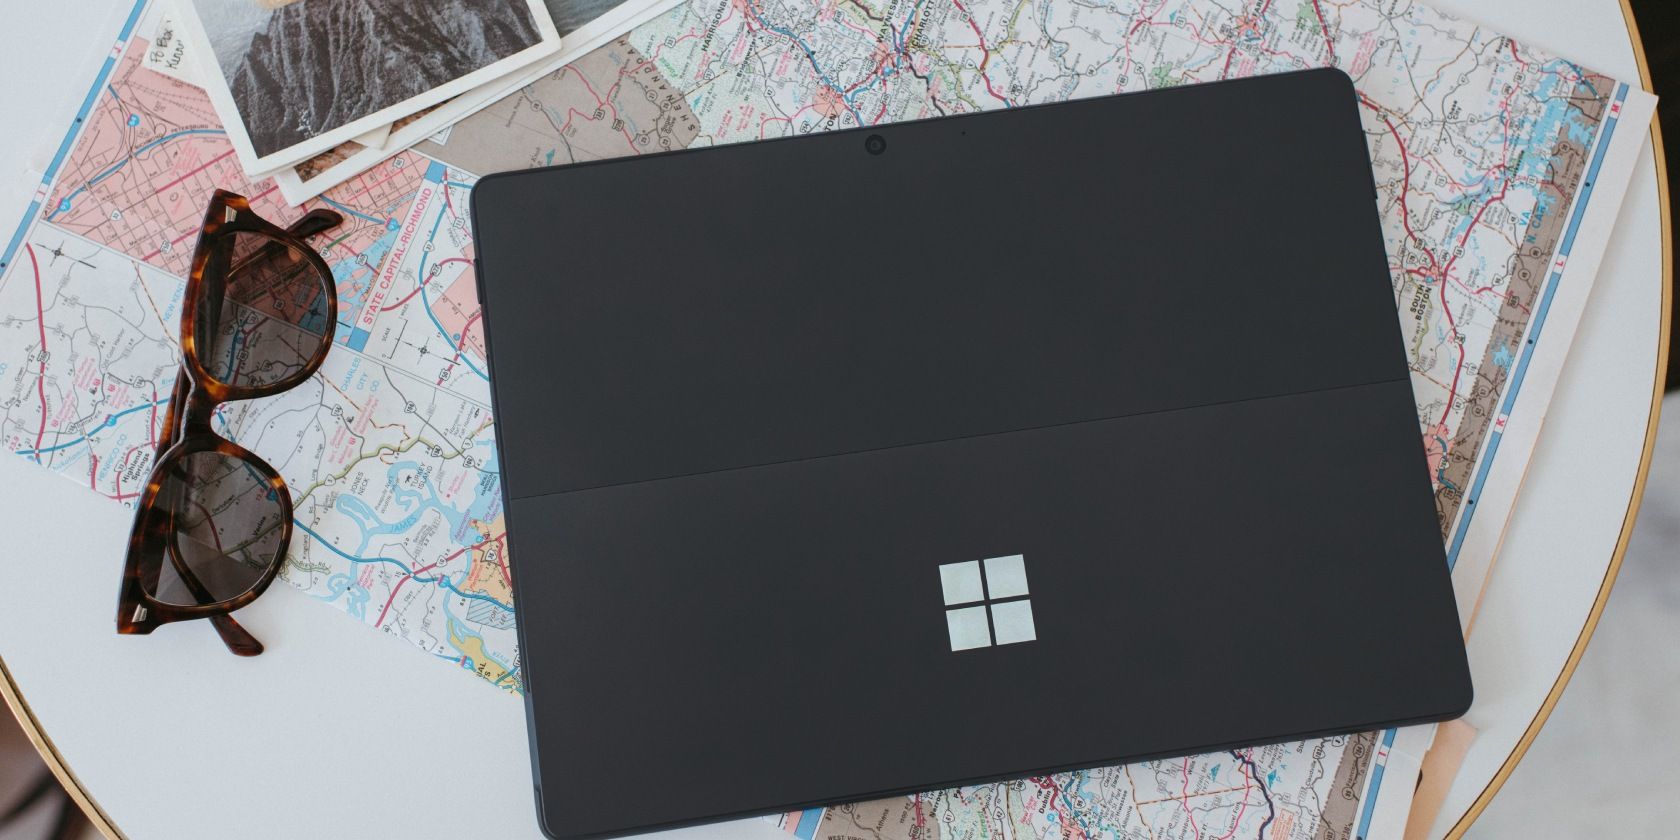 A windows laptop on a table with a map